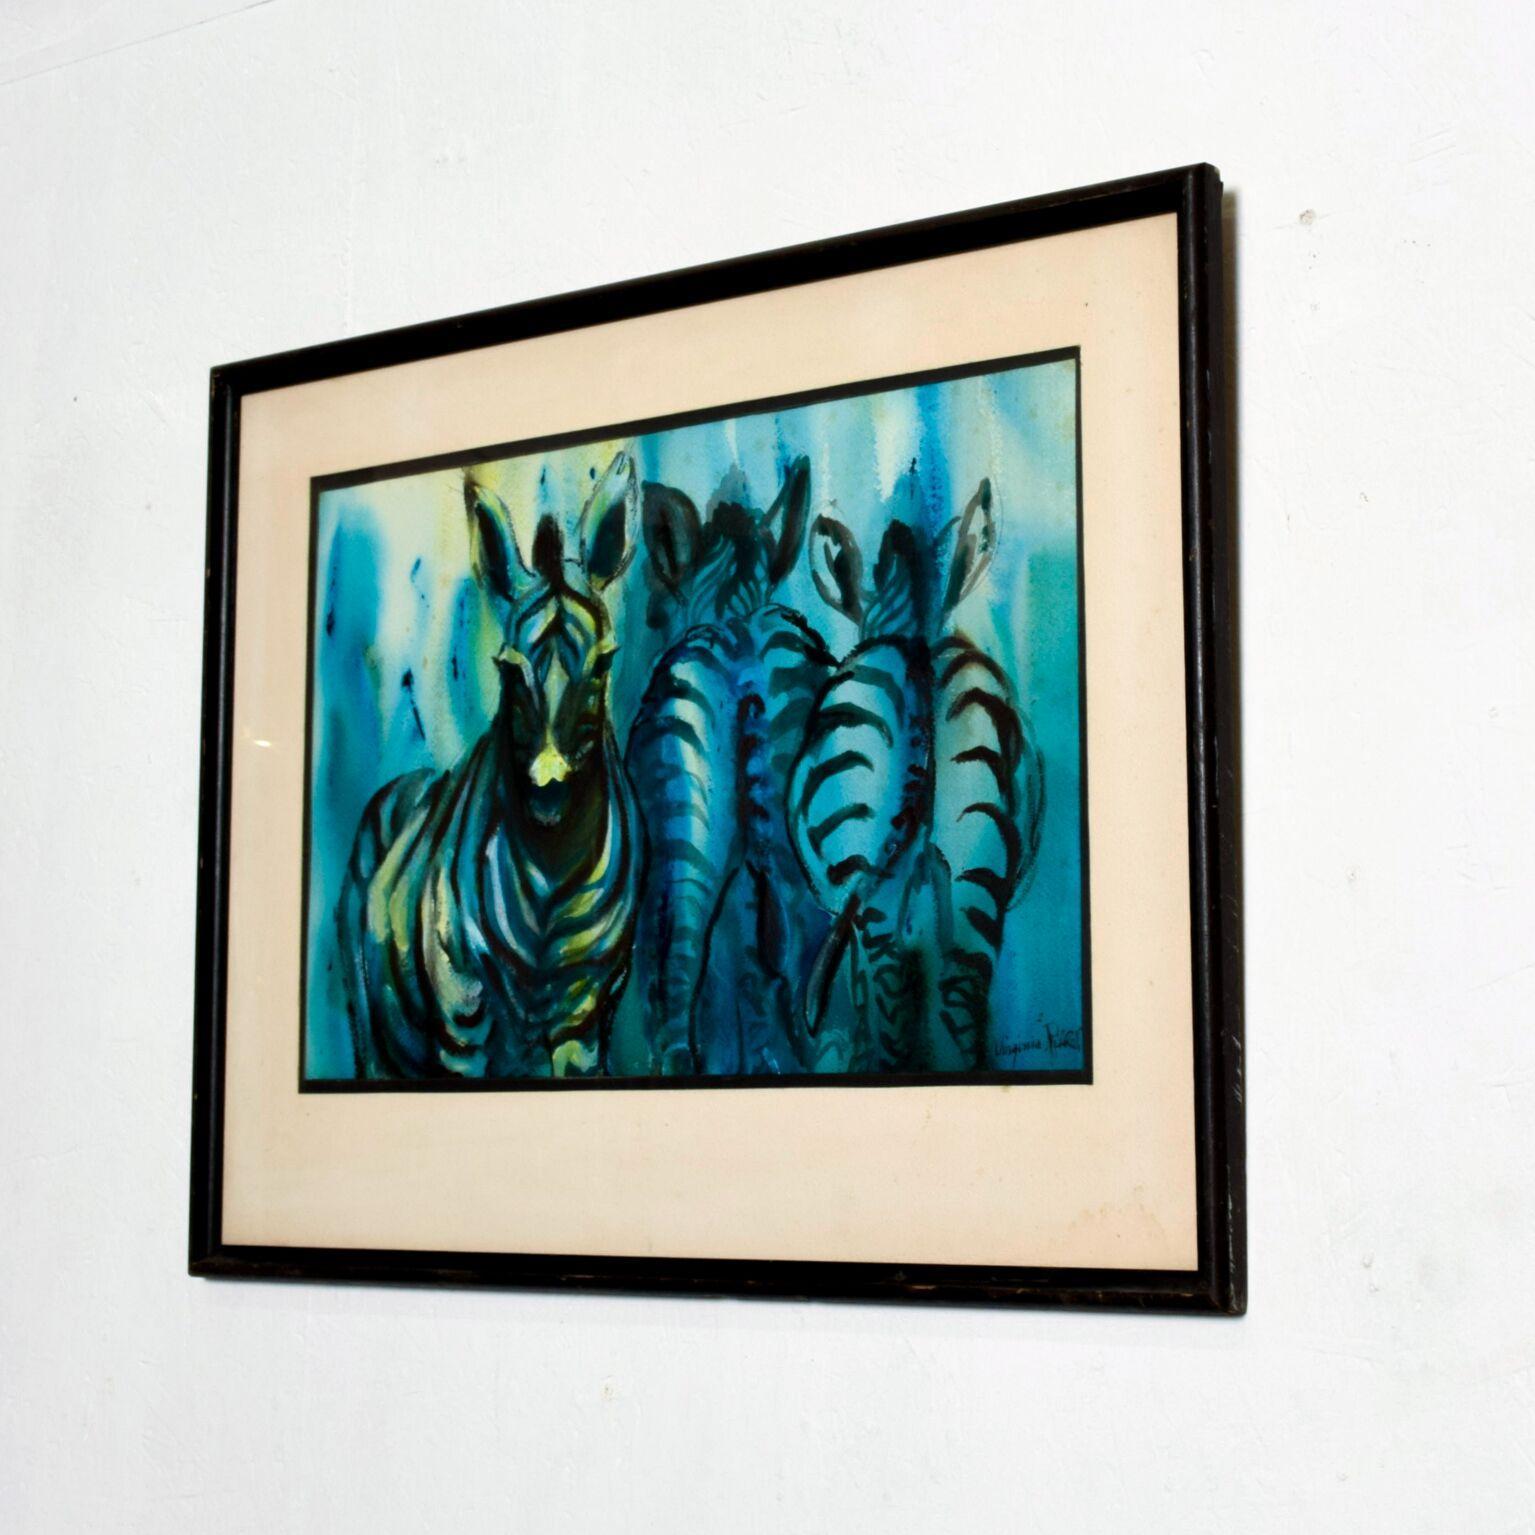 Calming blue abstract Zebras in watercolor and or gouache on paper, signed Virginia P
We are unable to decipher complete signature.
25 H x 27.5 x .75Thick (frame), Art 14 x 21
Original preowned unrestored vintage condition. Mat shows light